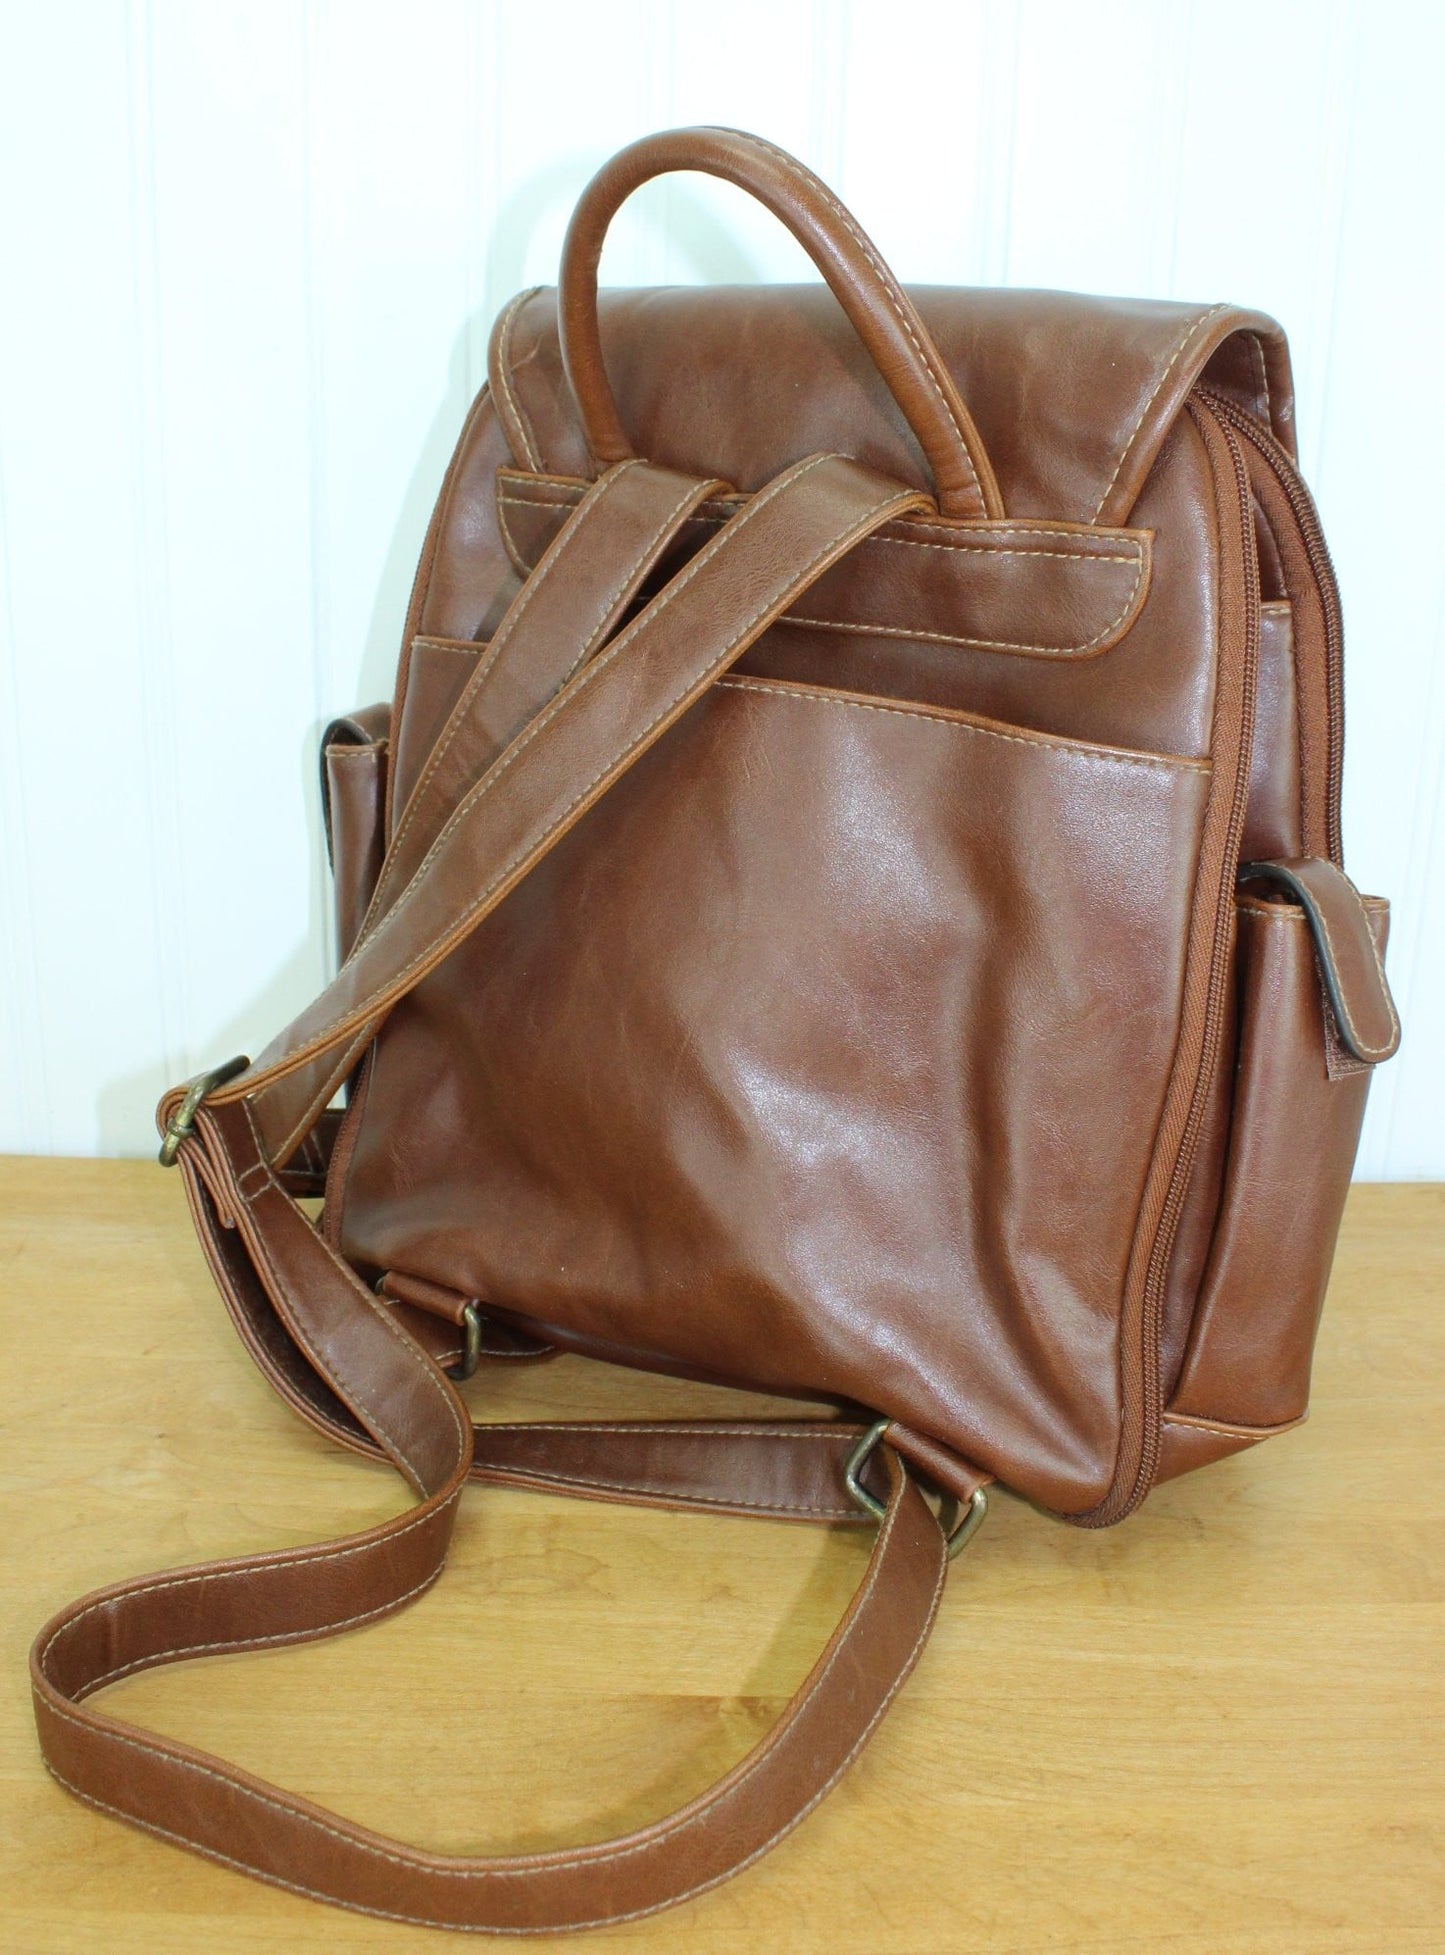 Rosetti Leather Backpack - Brown Double Strap - Compartments Galore good vintage